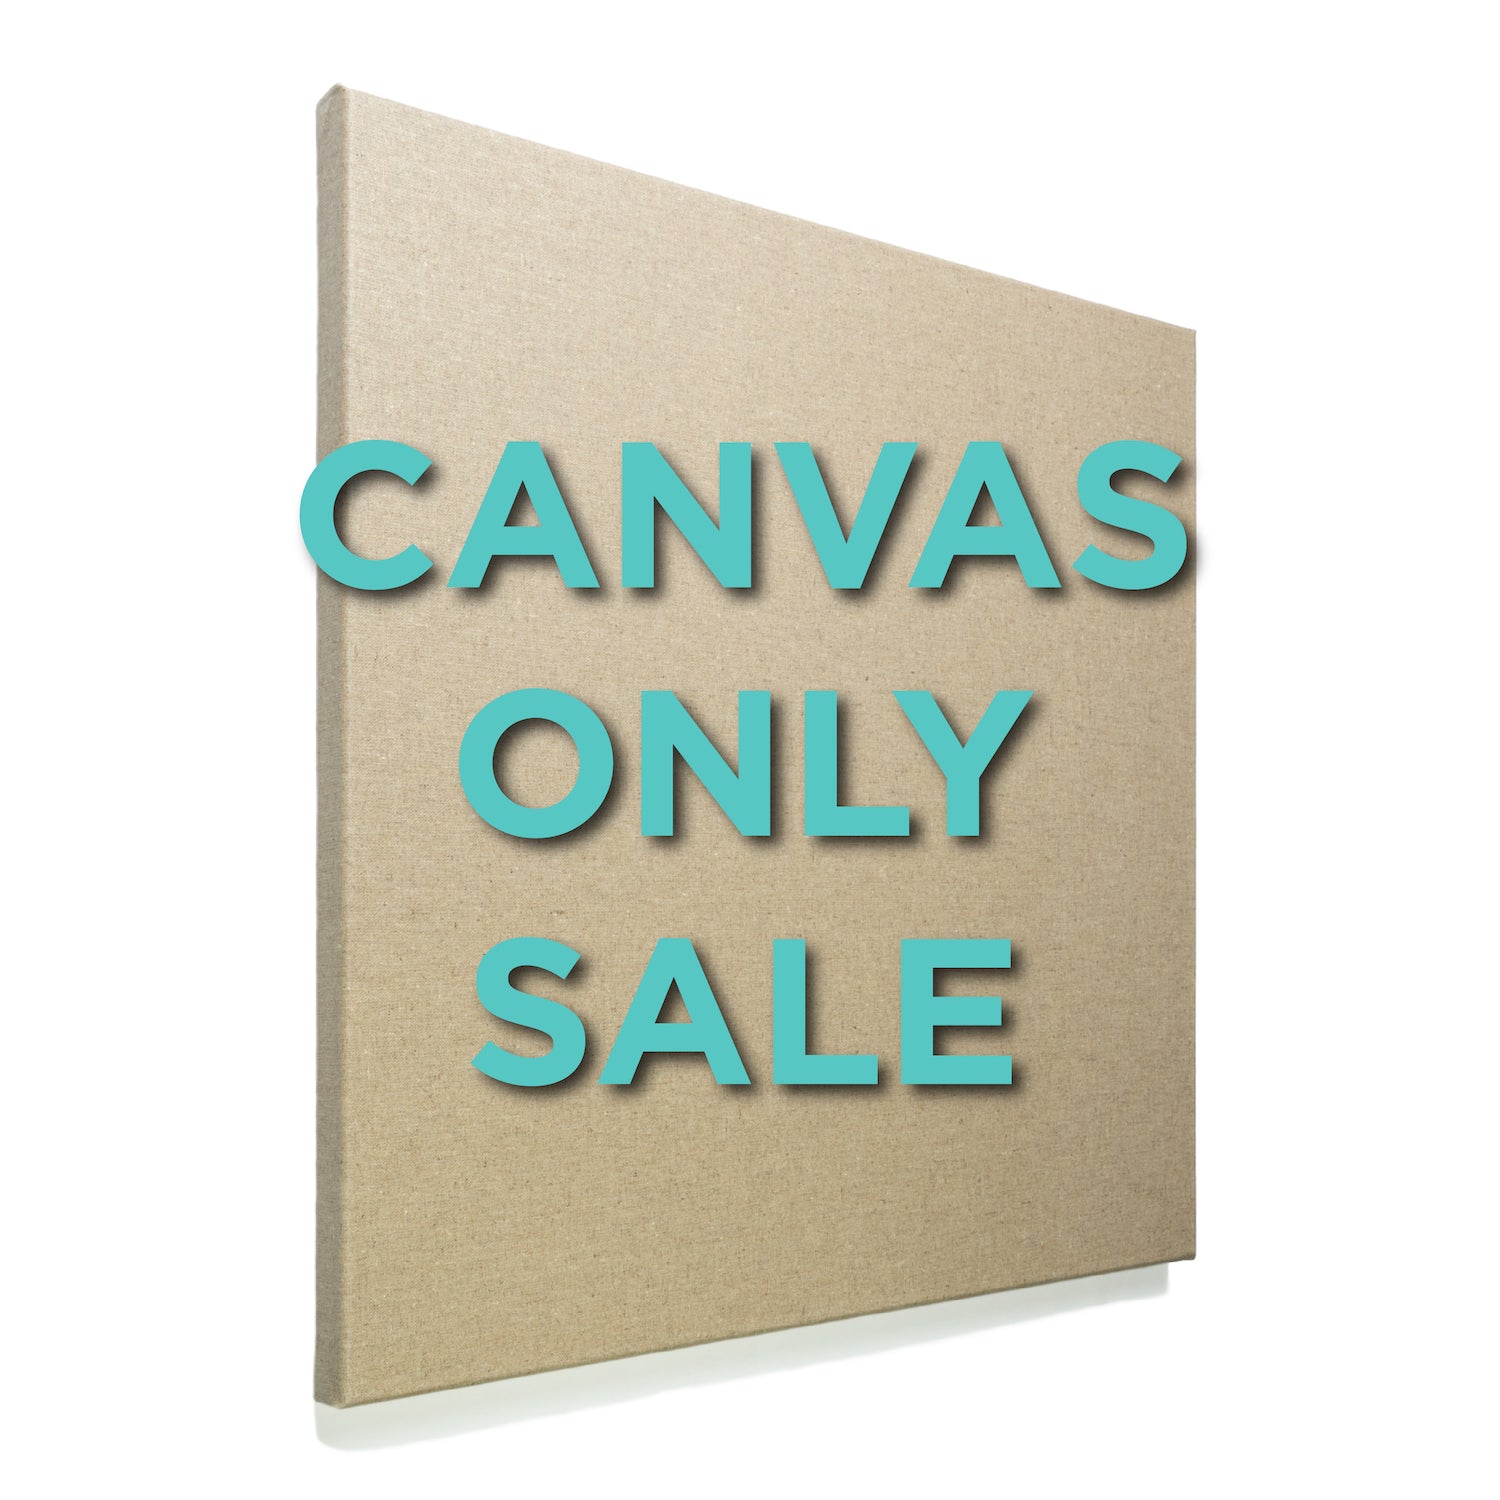 Stretched Canvas Black Friday Sale